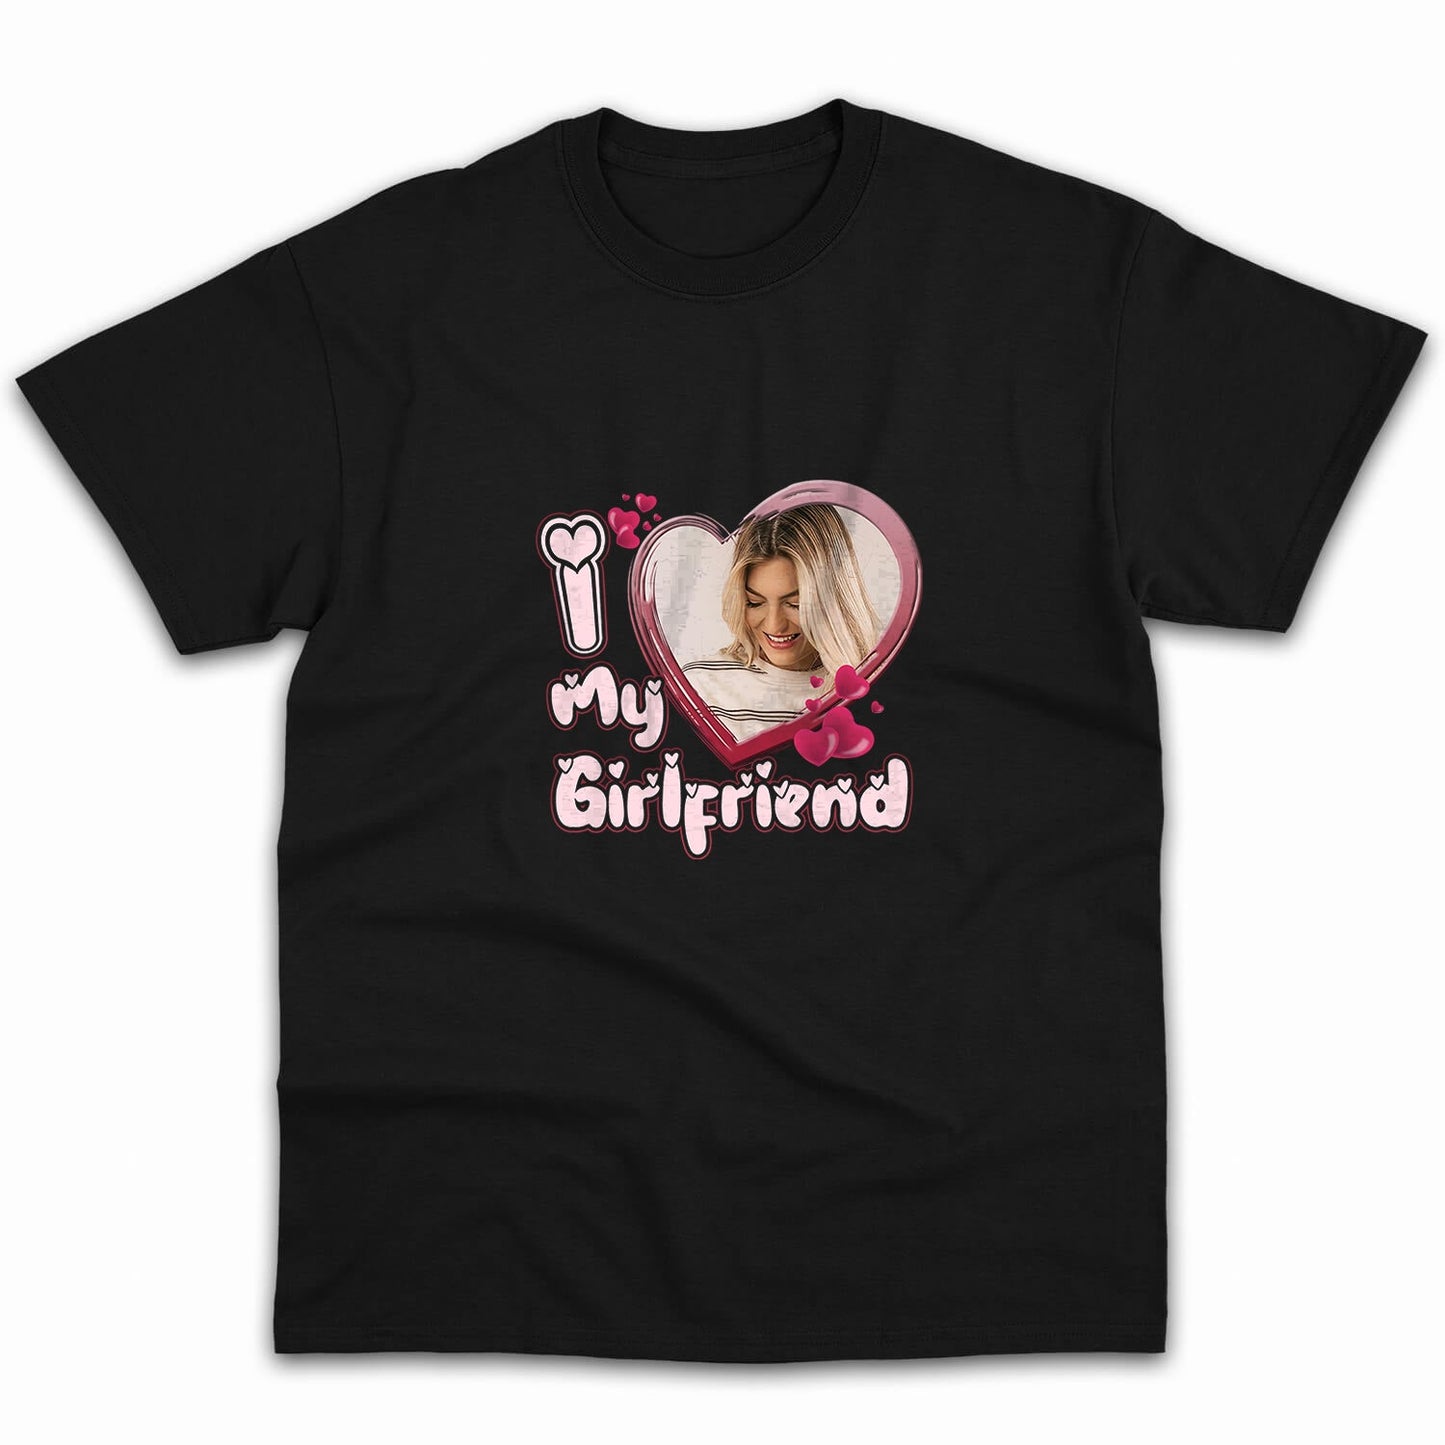 I Love My Girlfriend - Personalized Anniversary or Valentine's Day gift for Boyfriend - Custom Tshirt - MyMindfulGifts